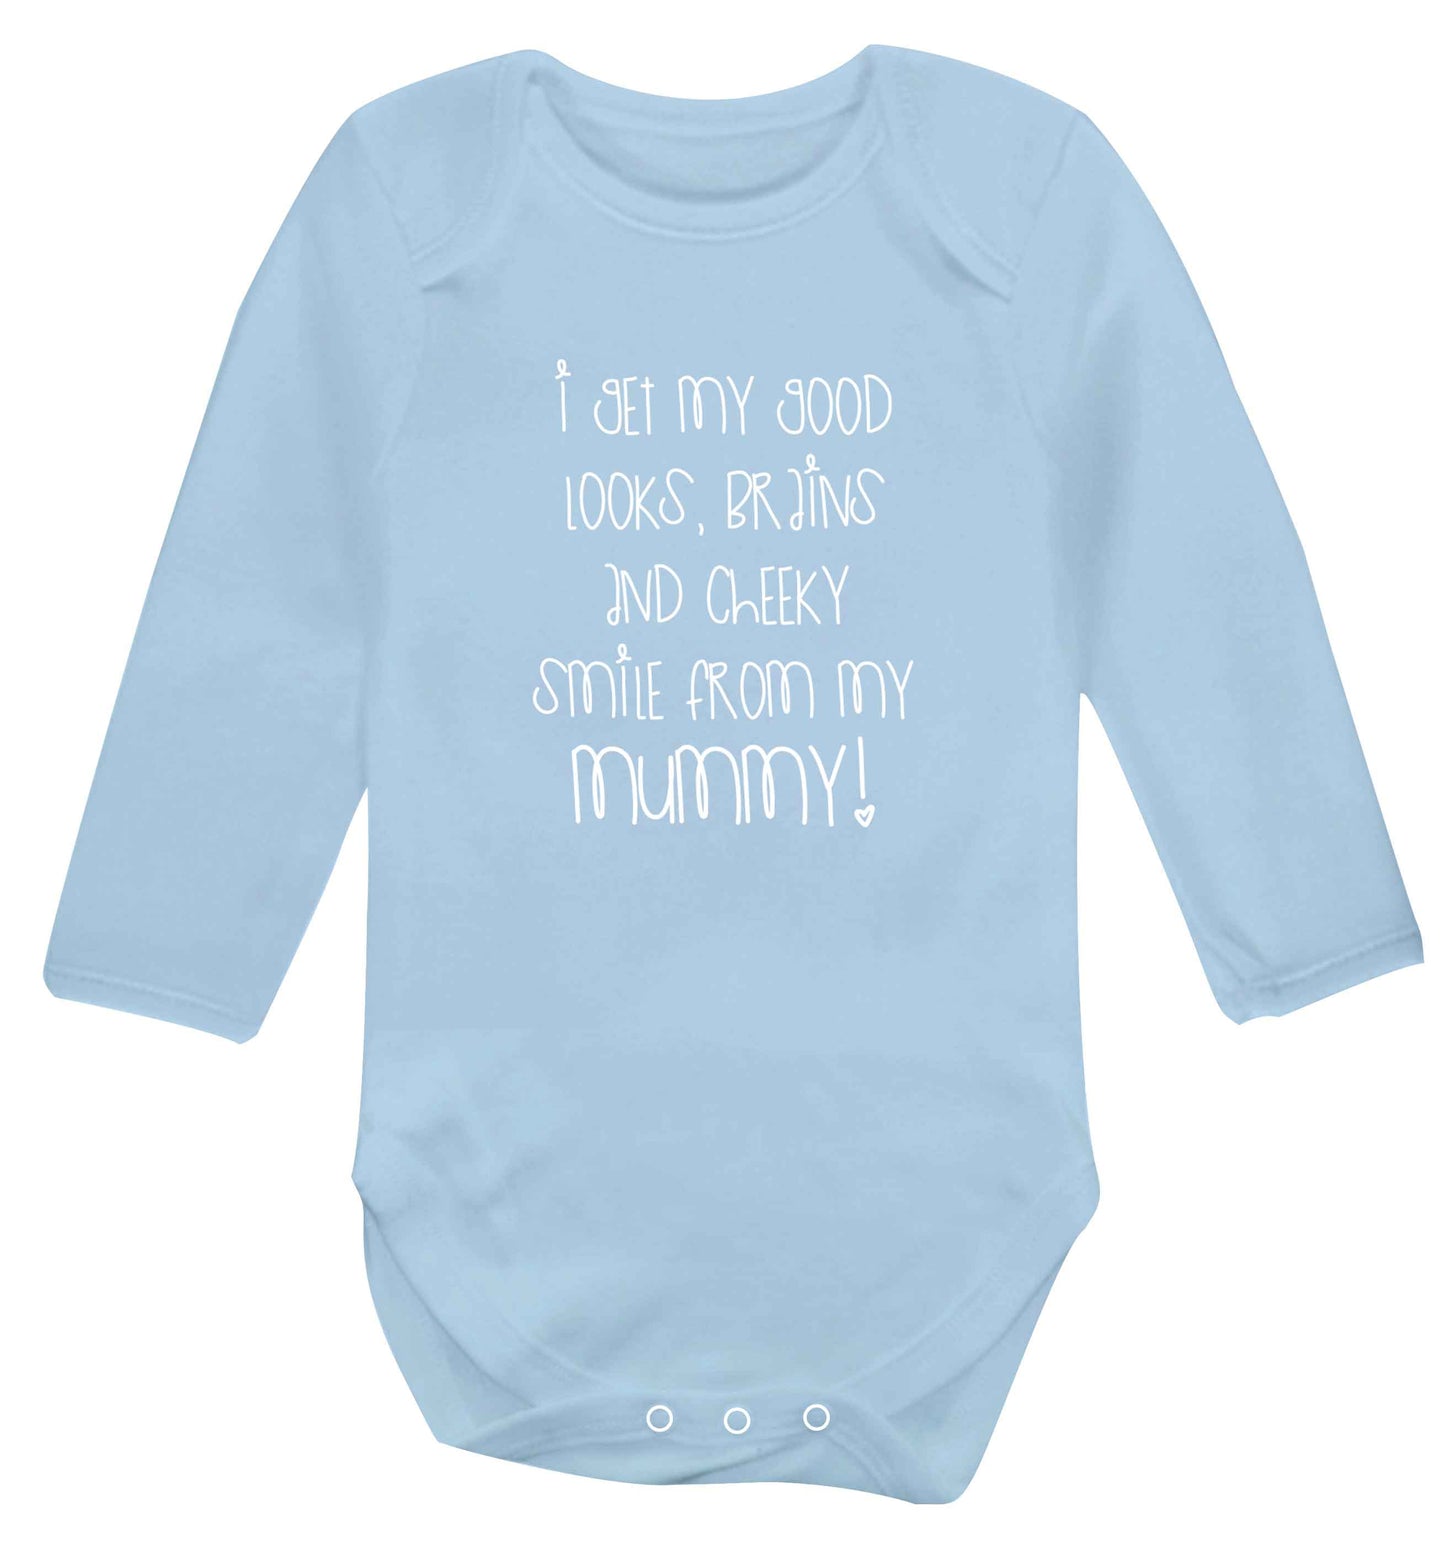 I get my good looks, brains and cheeky smile from my mummy baby vest long sleeved pale blue 6-12 months